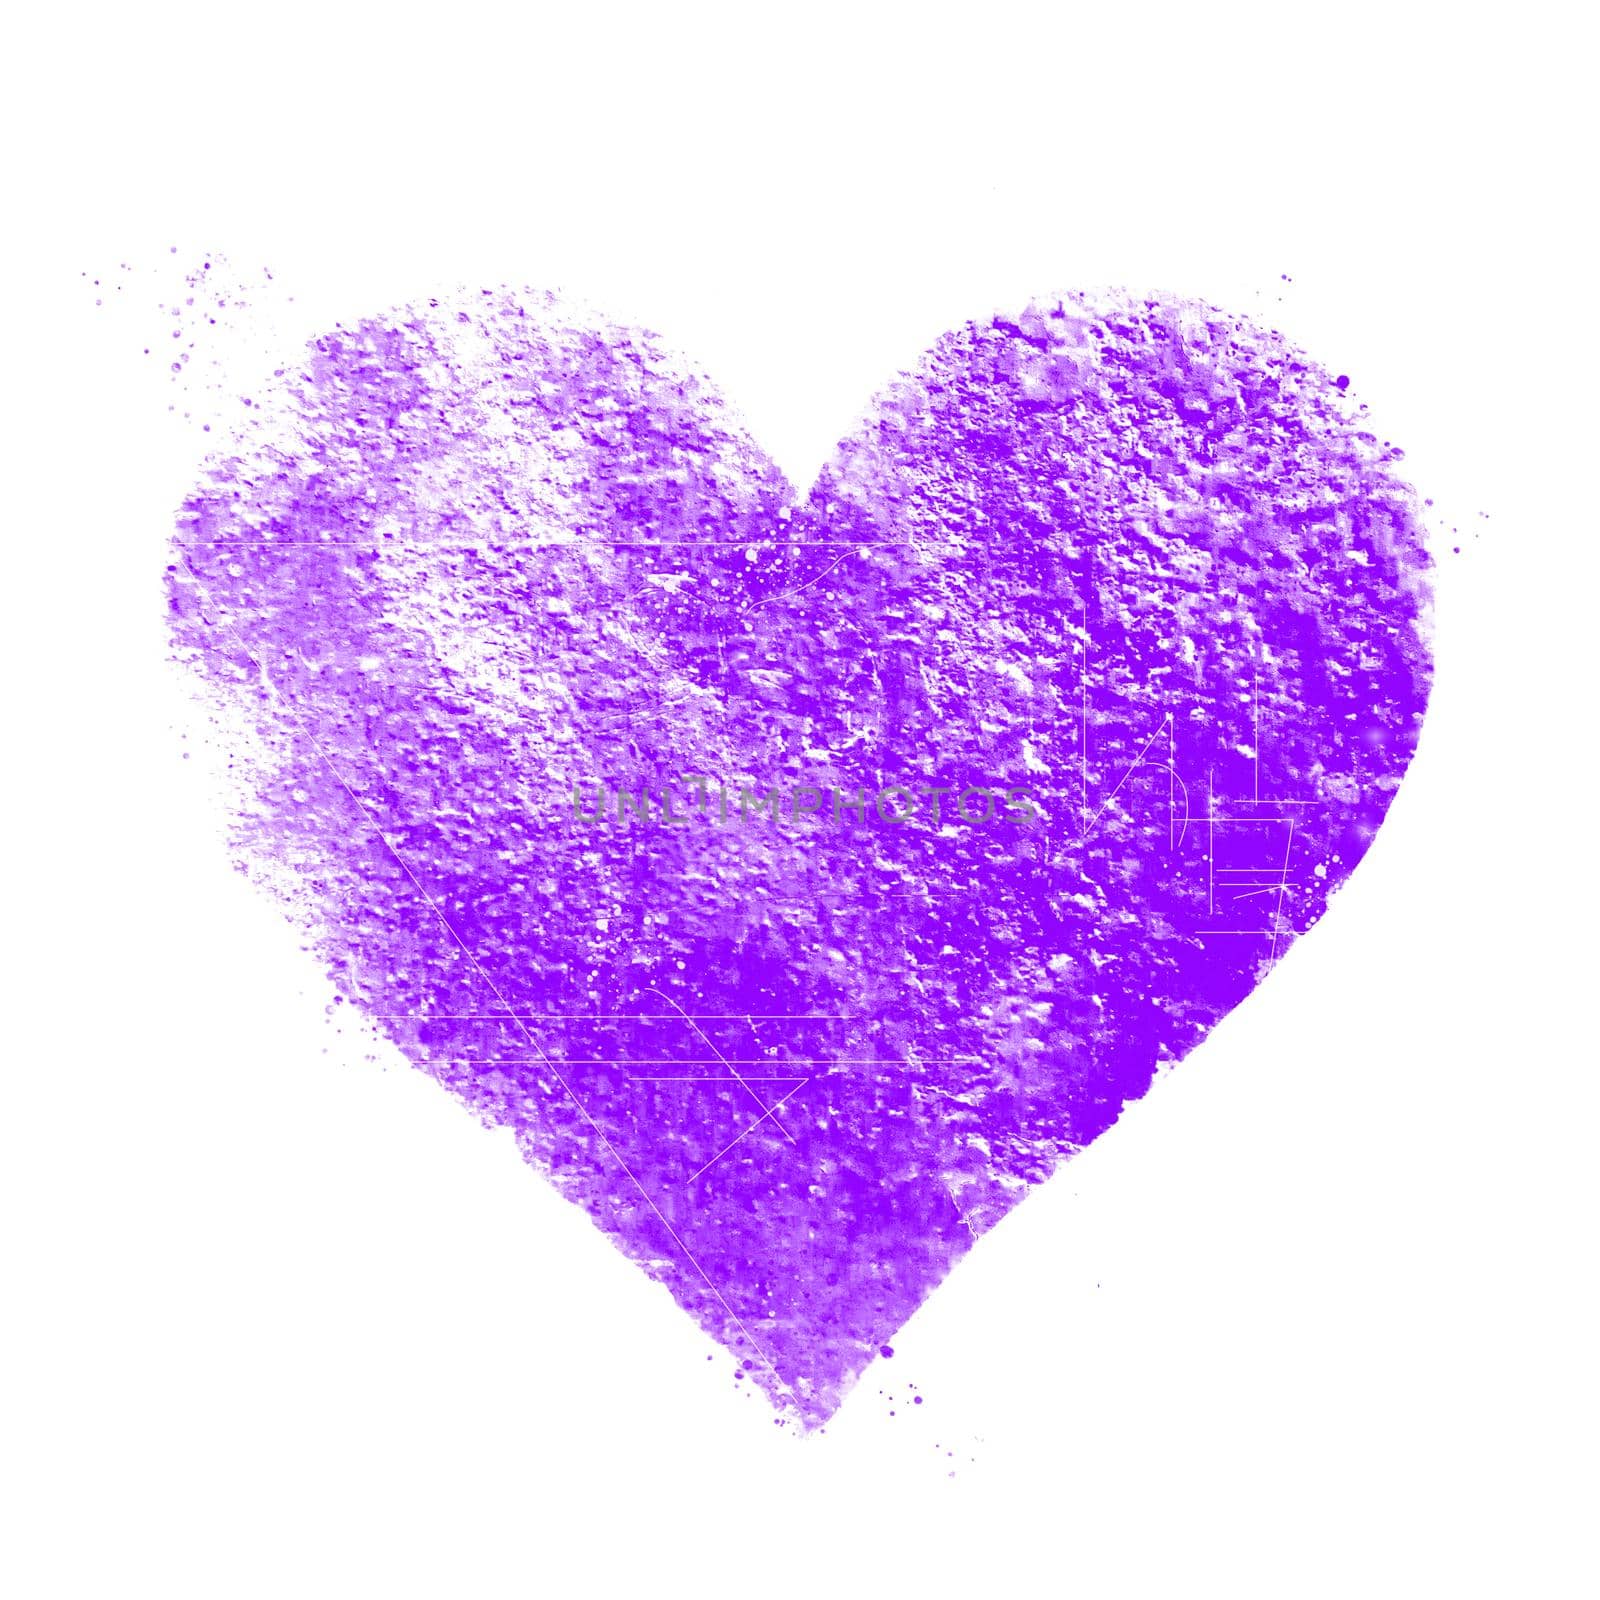 Vintage purple heart. Great for Valentine's Day, wedding, scrapbook, grunge surface textures.
Scratched heart